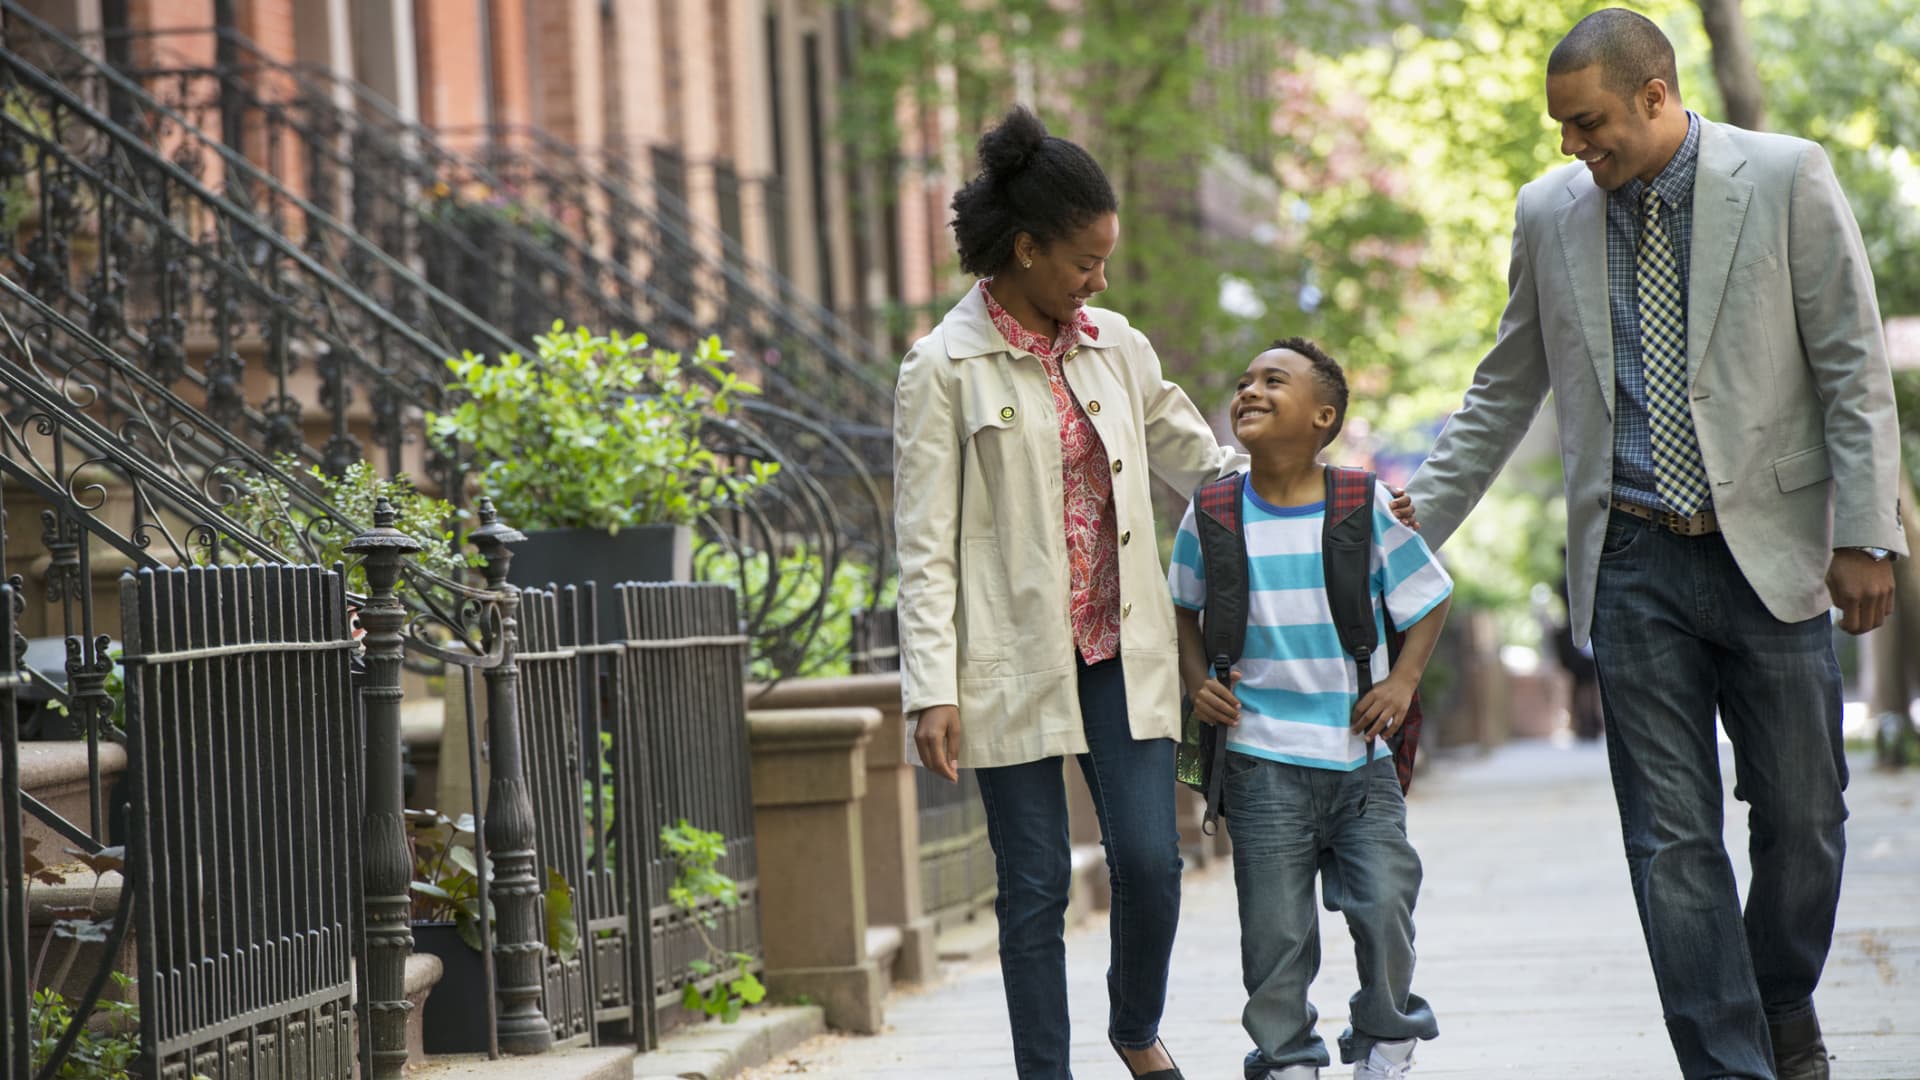 Black families achieve upward mobility in areas with high opportunities